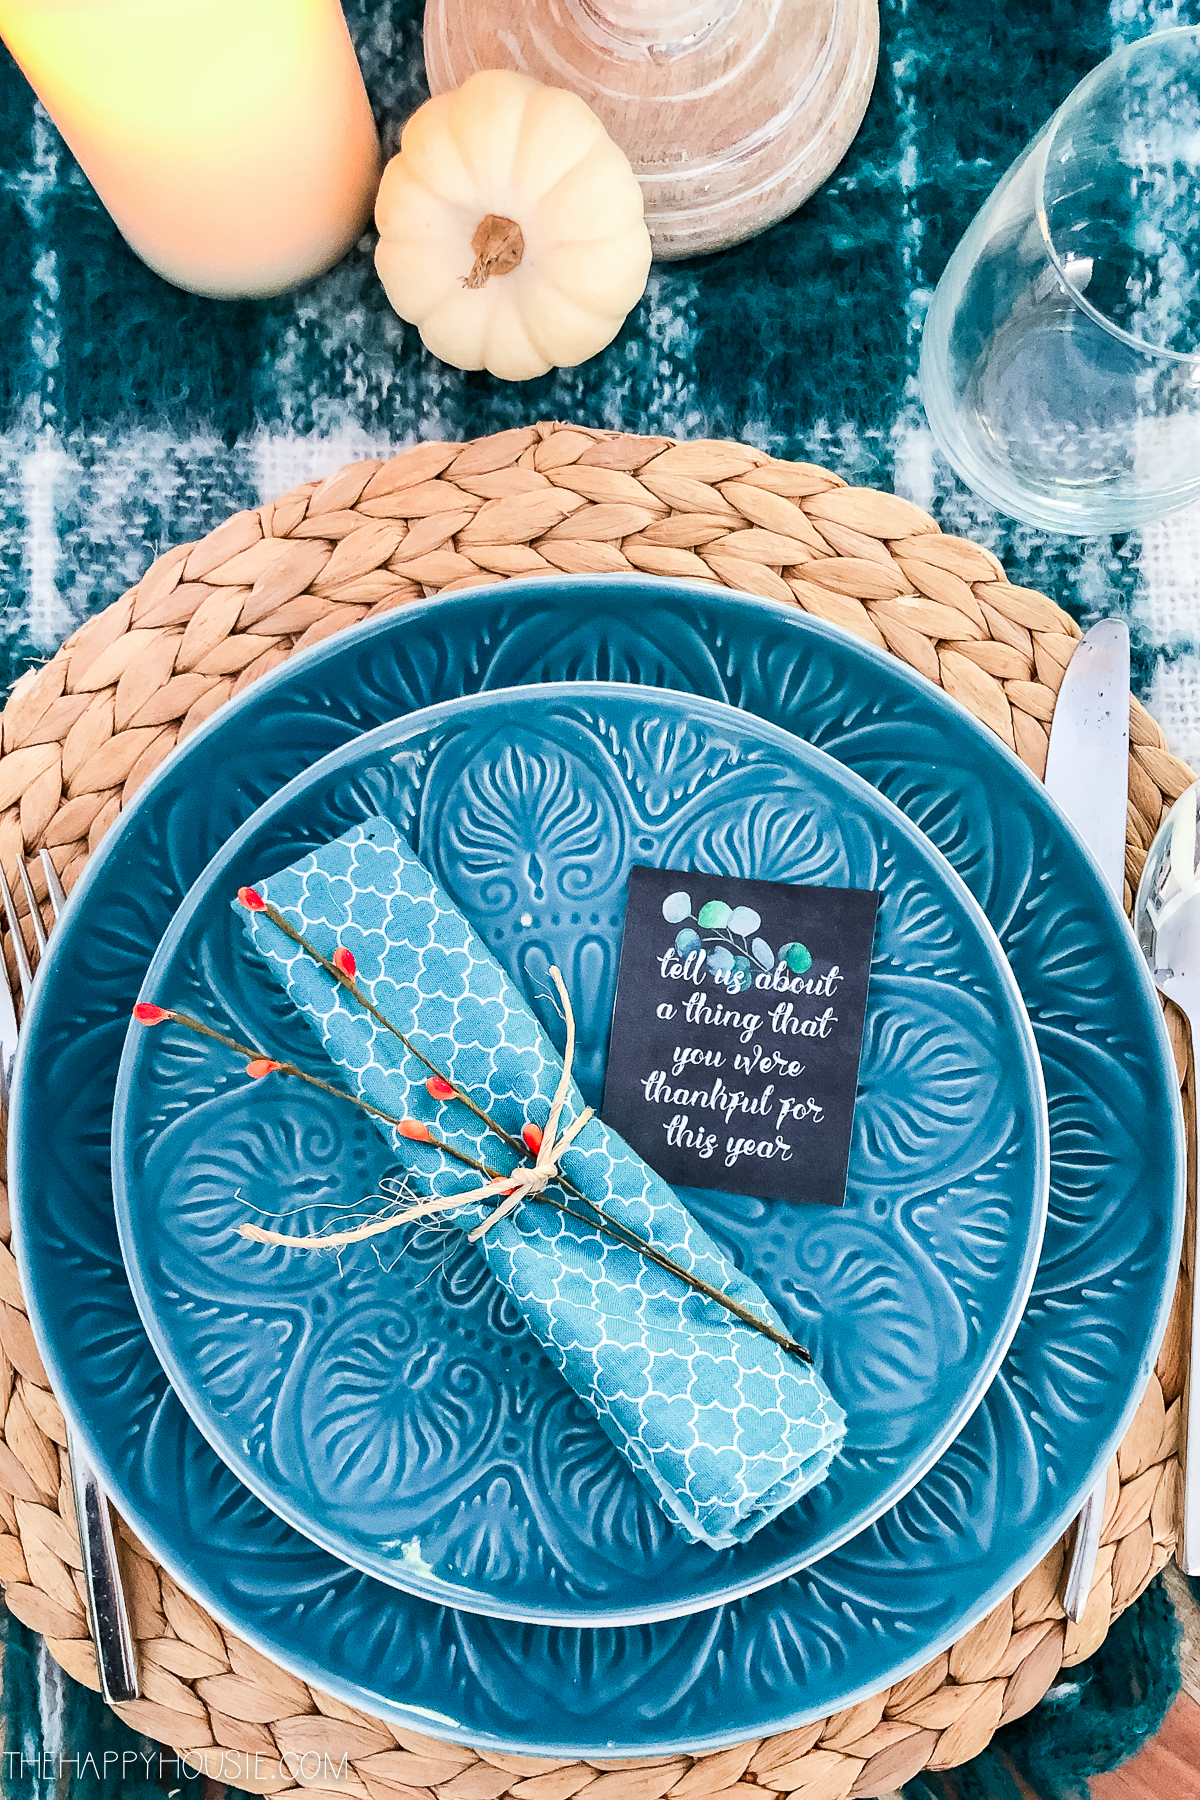 Blue plates and napkin with a sprig of branch tied around it.